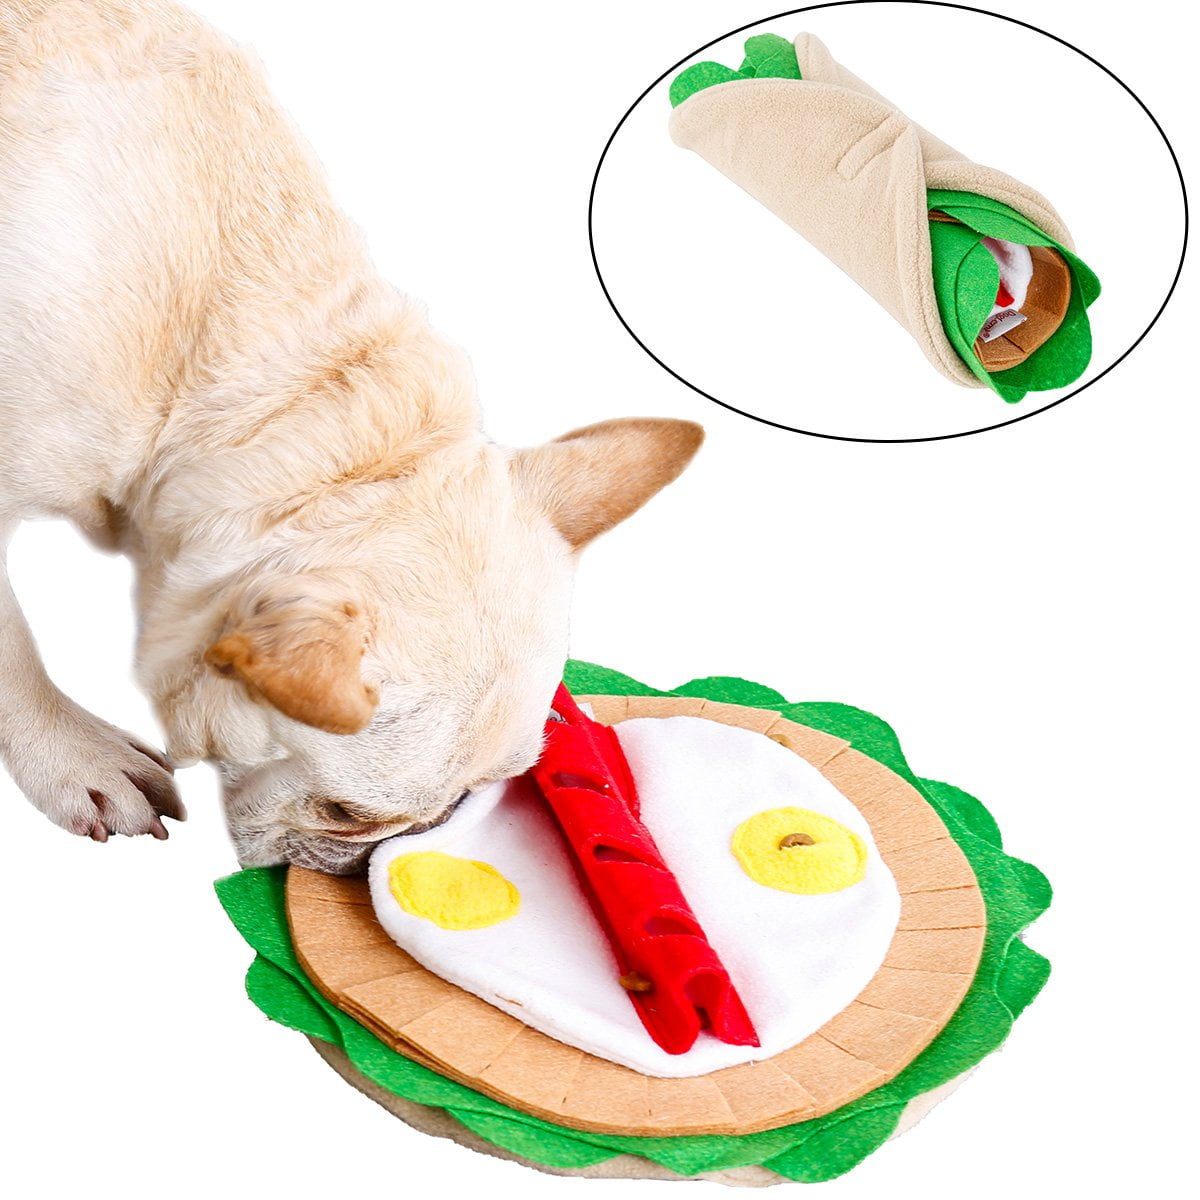 Dogs Snuffle Mat Dog Toy Dog Food Mat Dog Enrichment Toys For Cats Rabbits Dogs  Boredom Busters Creative Pizza Styling - AliExpress